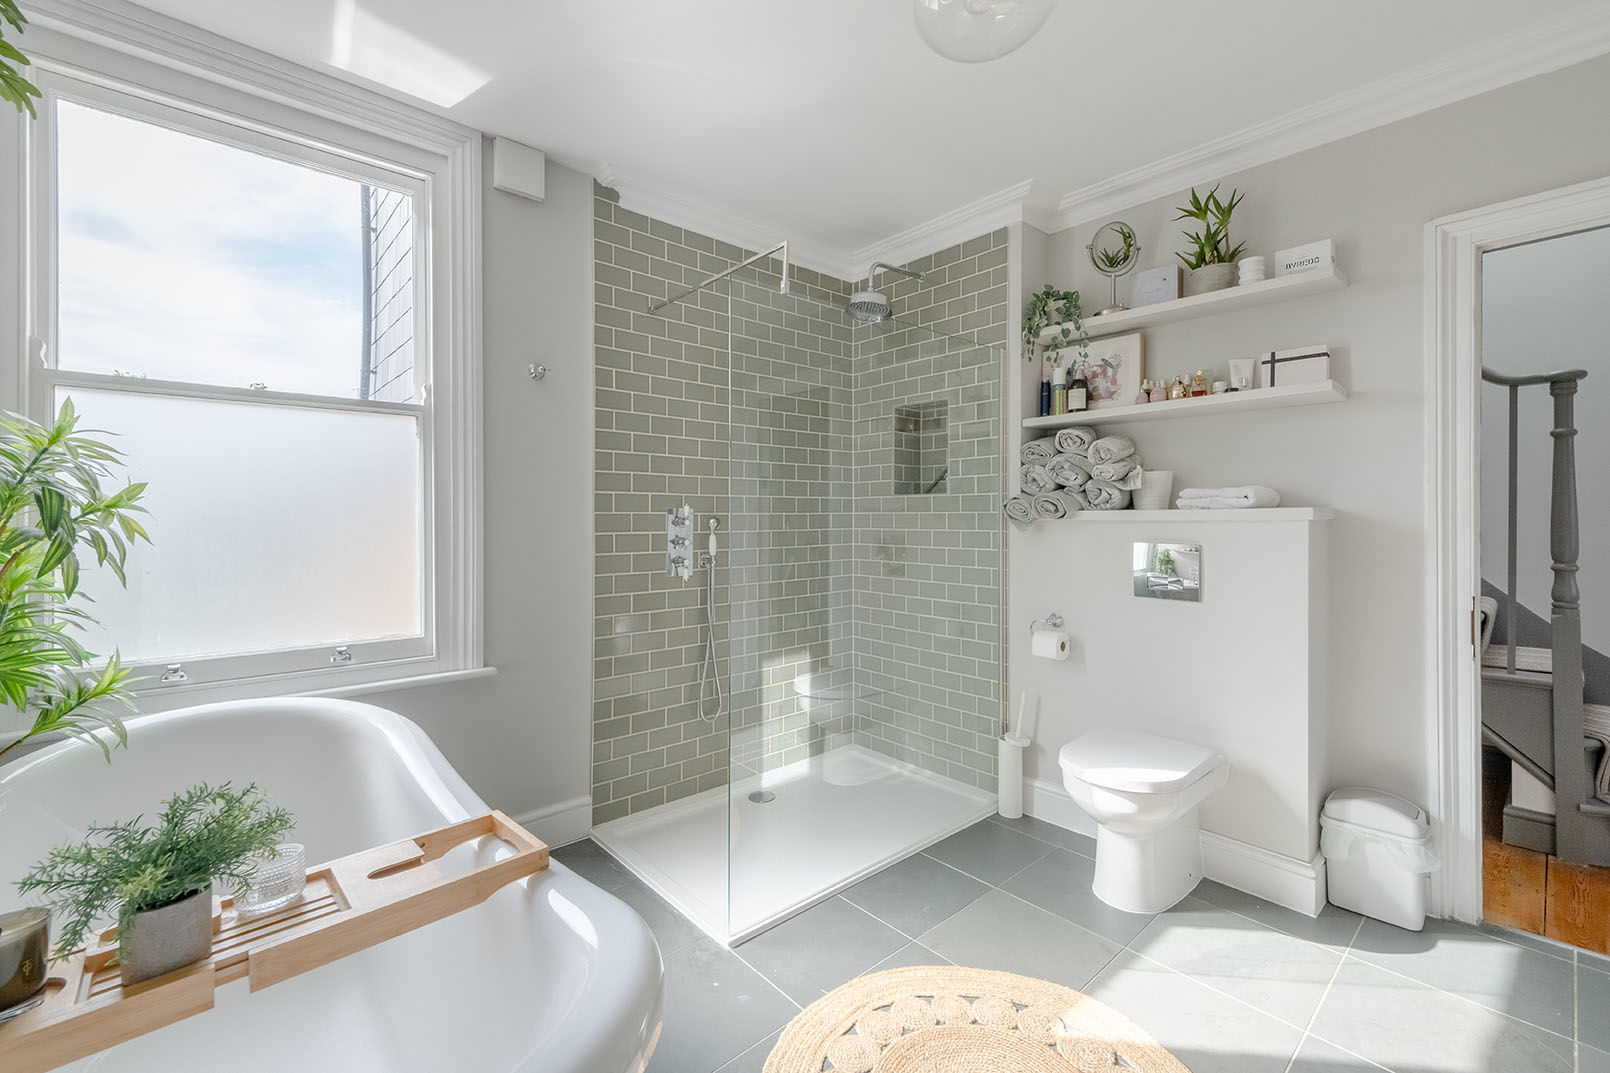 a bathroom photo from a property photography series, natural colours, bright and modern design space, light grey walls, light green tiles, showing the shower, toilet and partial bathtub